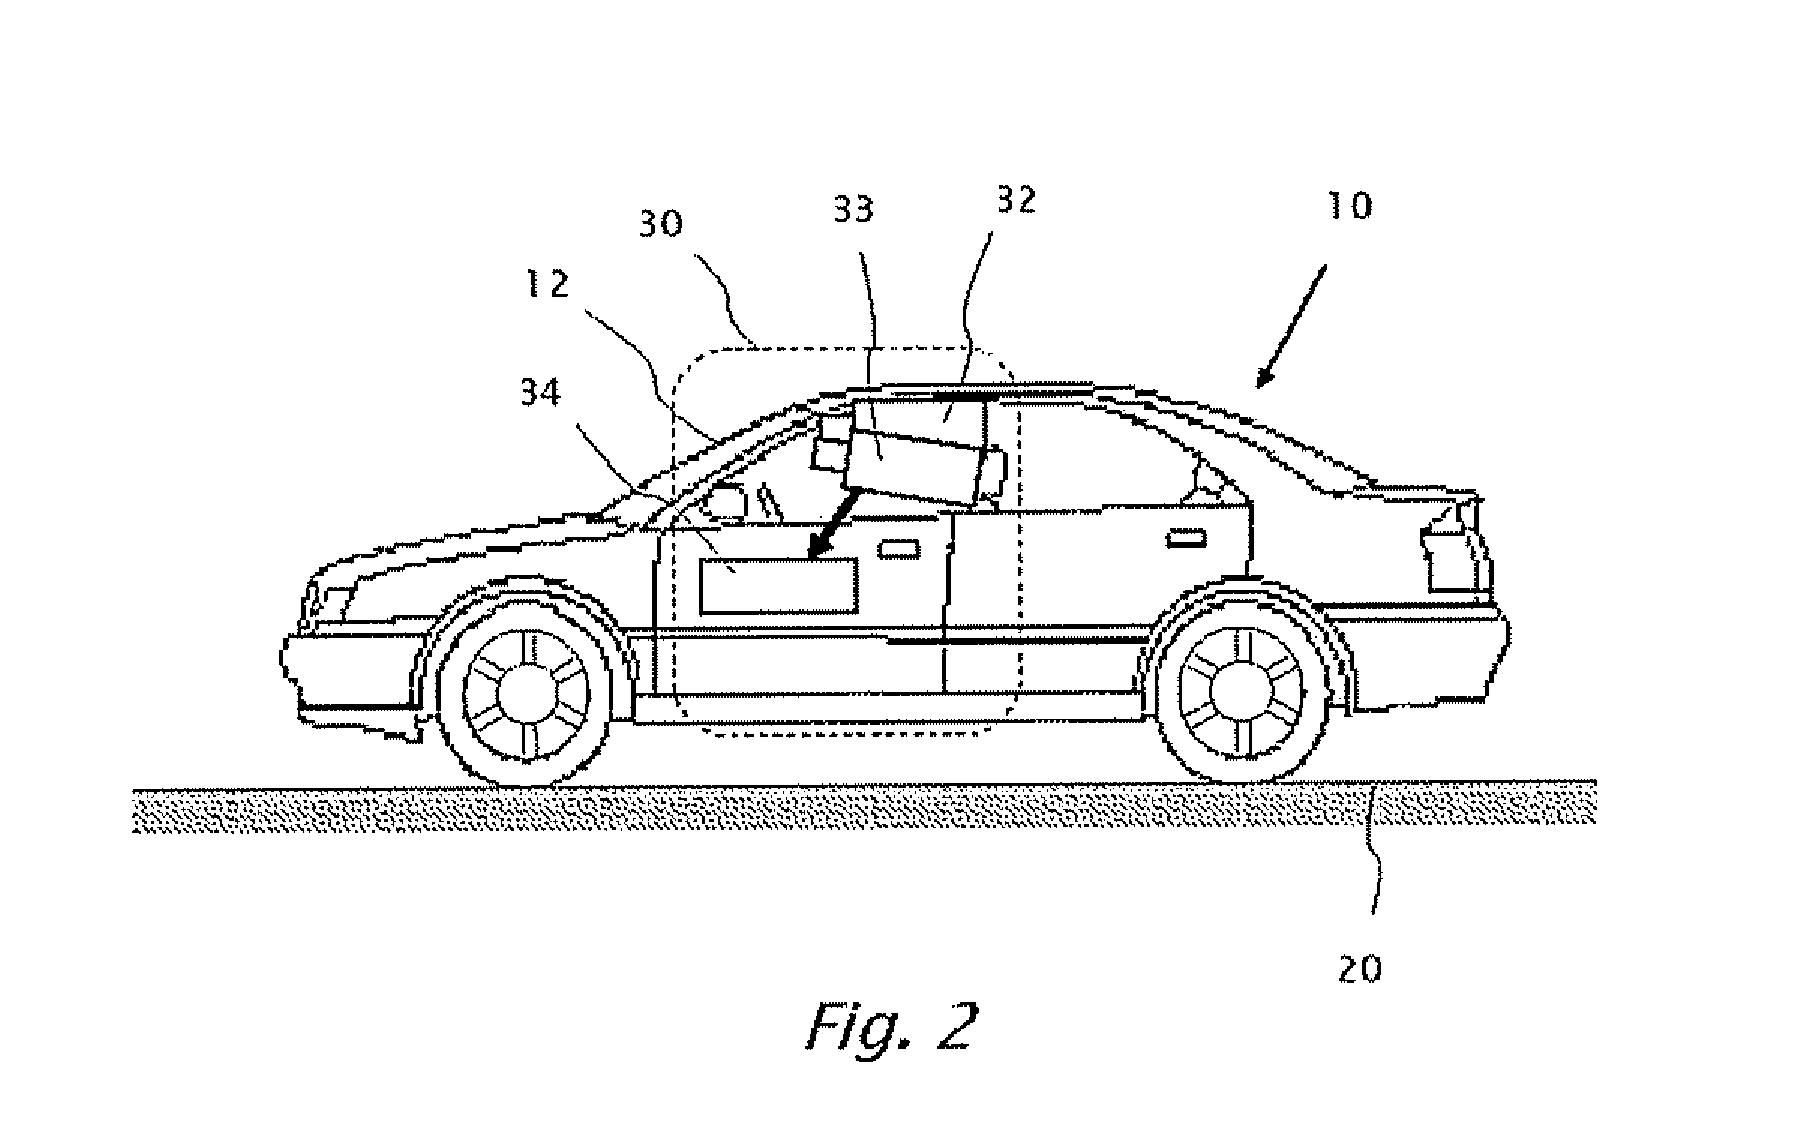 Systems and methods for detecting obstructions in a camera field of view